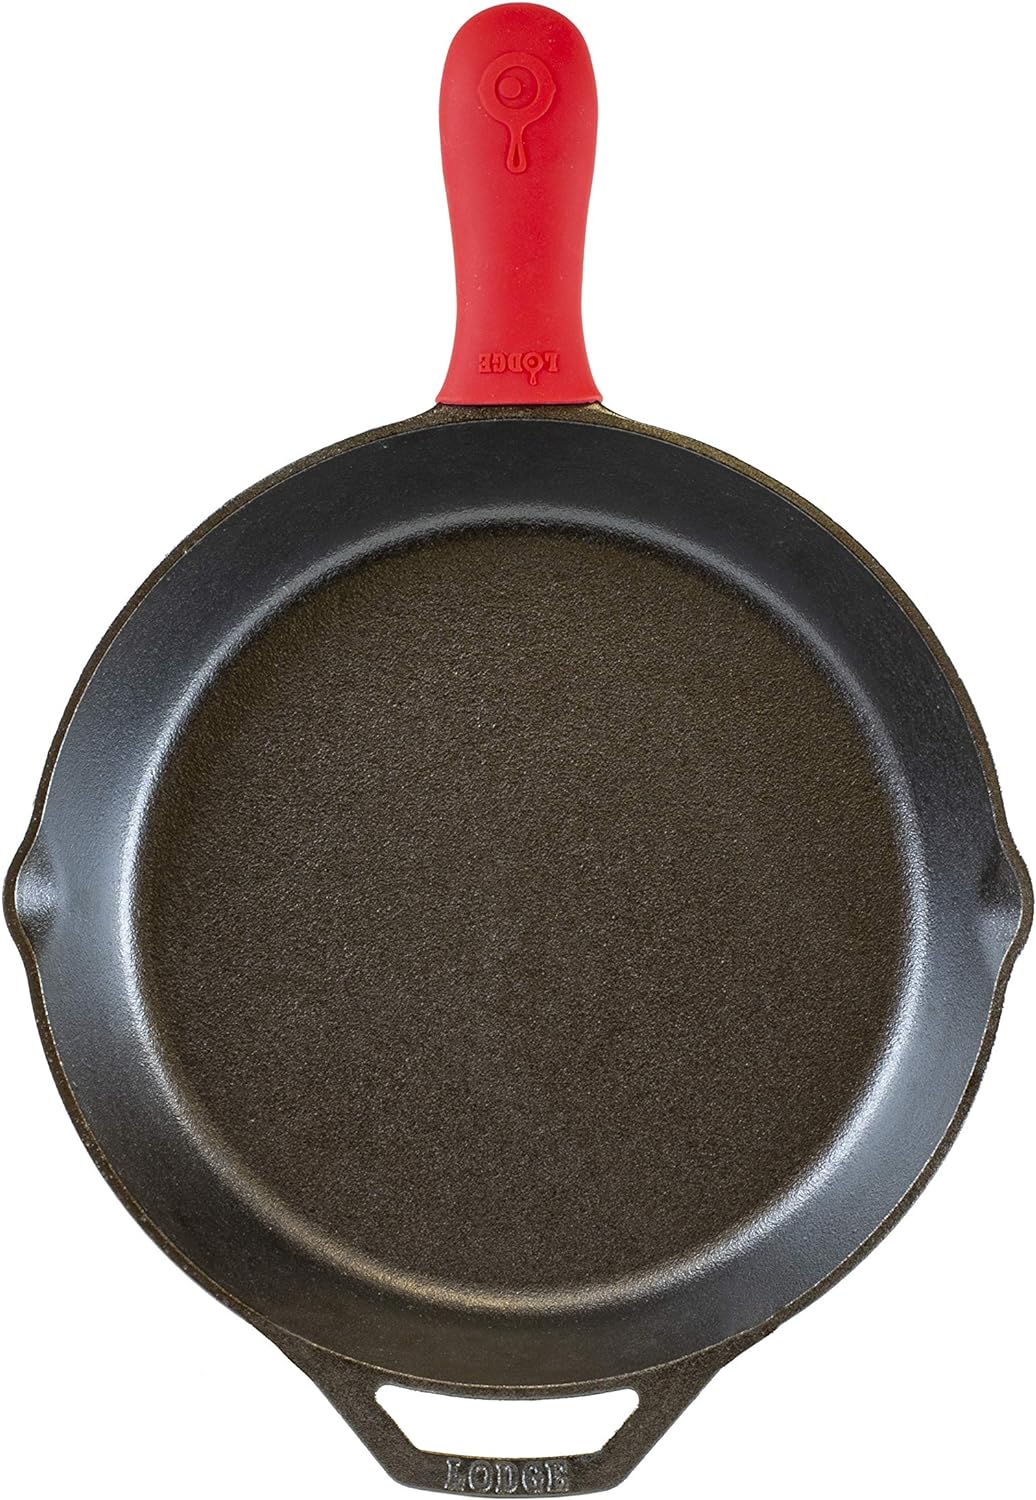 Lodge cast iron skillet with red silicone handle.